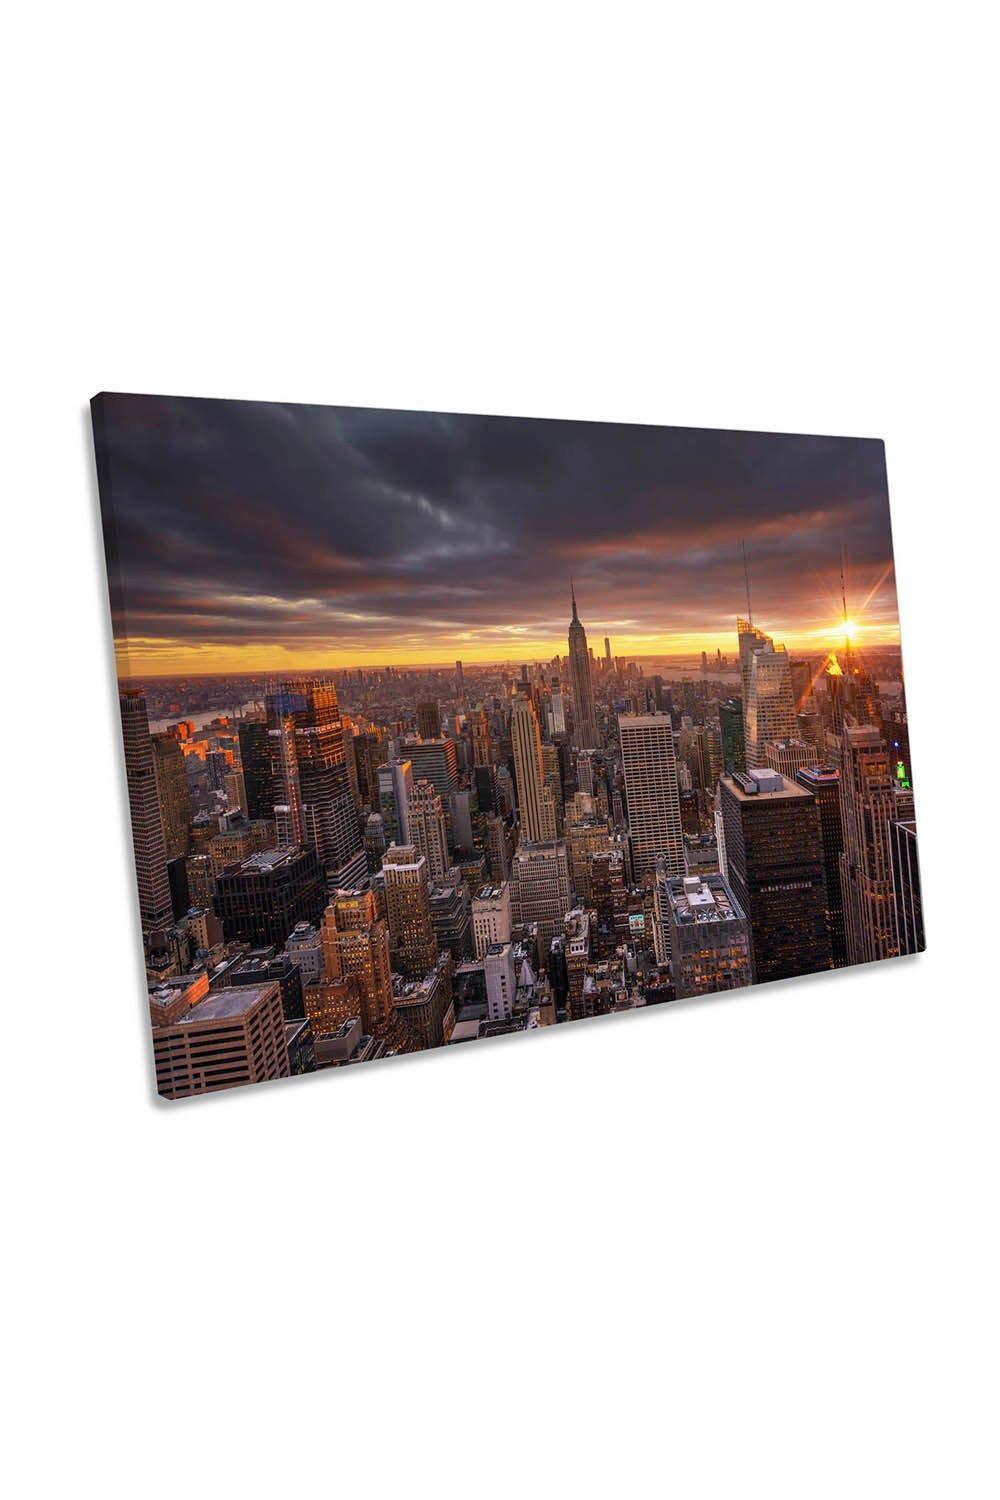 Sunset over NYC New York City Orange Canvas Wall Art Picture Print